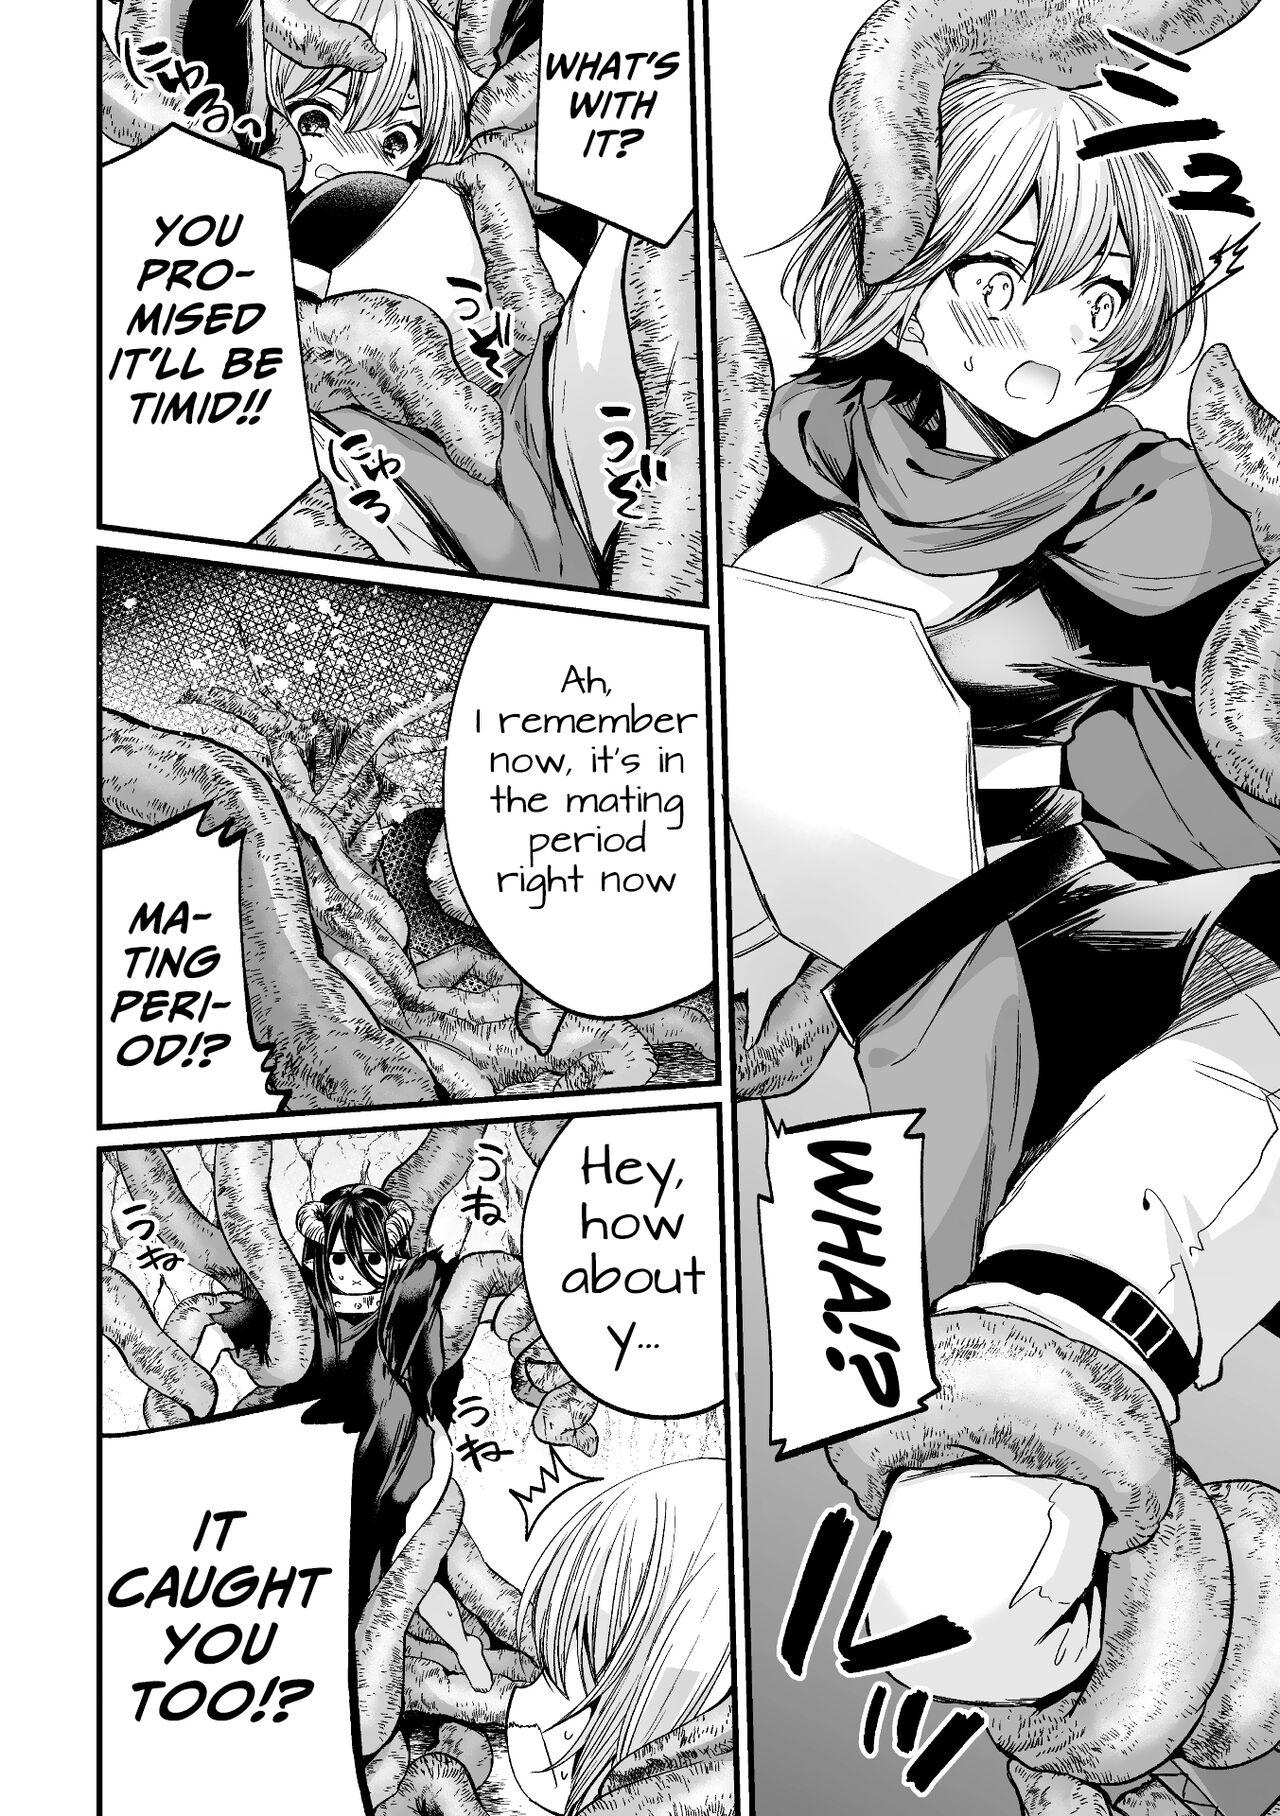 Oral Sex Gekinure! Namaiki TRAP | Rough TRAP in the Raw! - Ero trap dungeon Monster Dick - Page 6